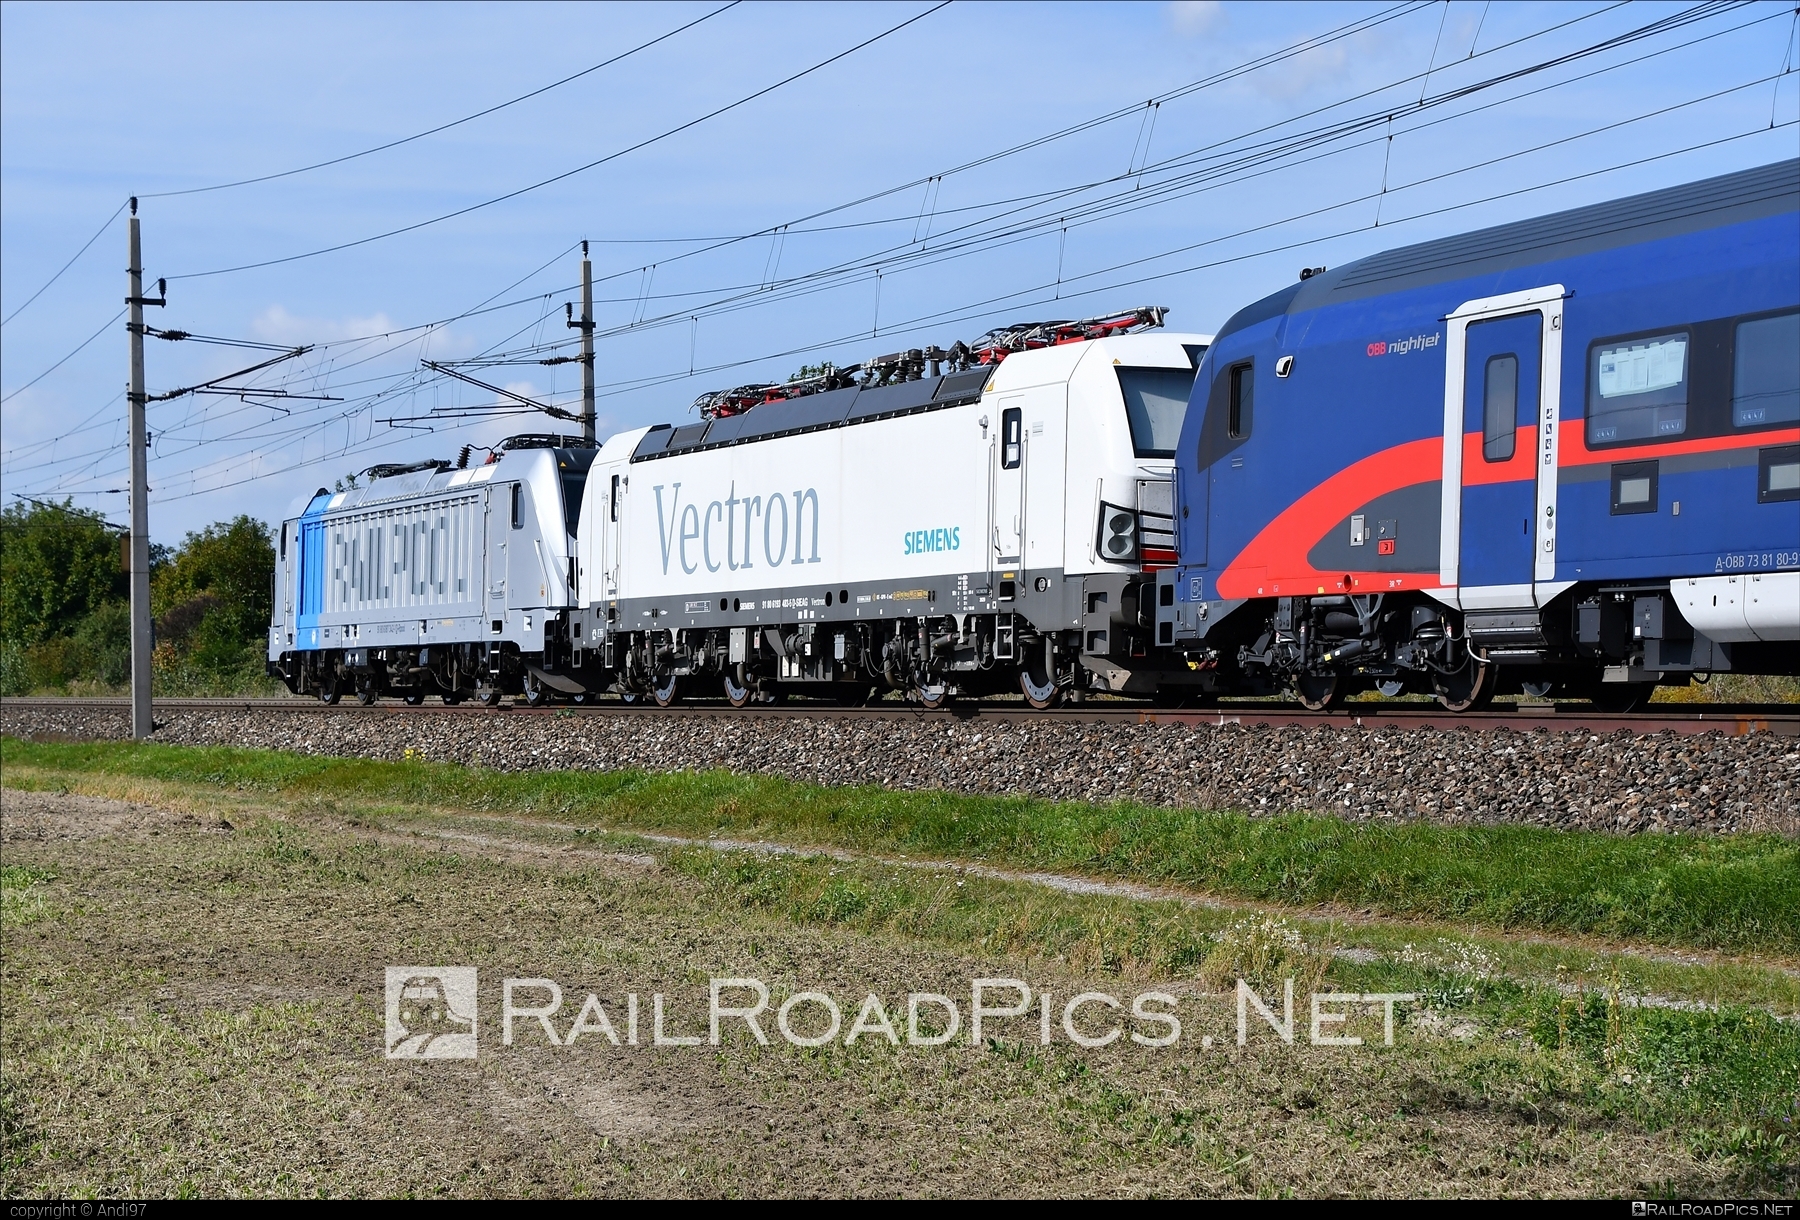 Siemens Vectron MS - 193 483 operated by Siemens Mobility GmbH #SiemensMobility #SiemensMobilityGmbH #siemens #siemensVectron #siemensVectronMS #vectron #vectronMS